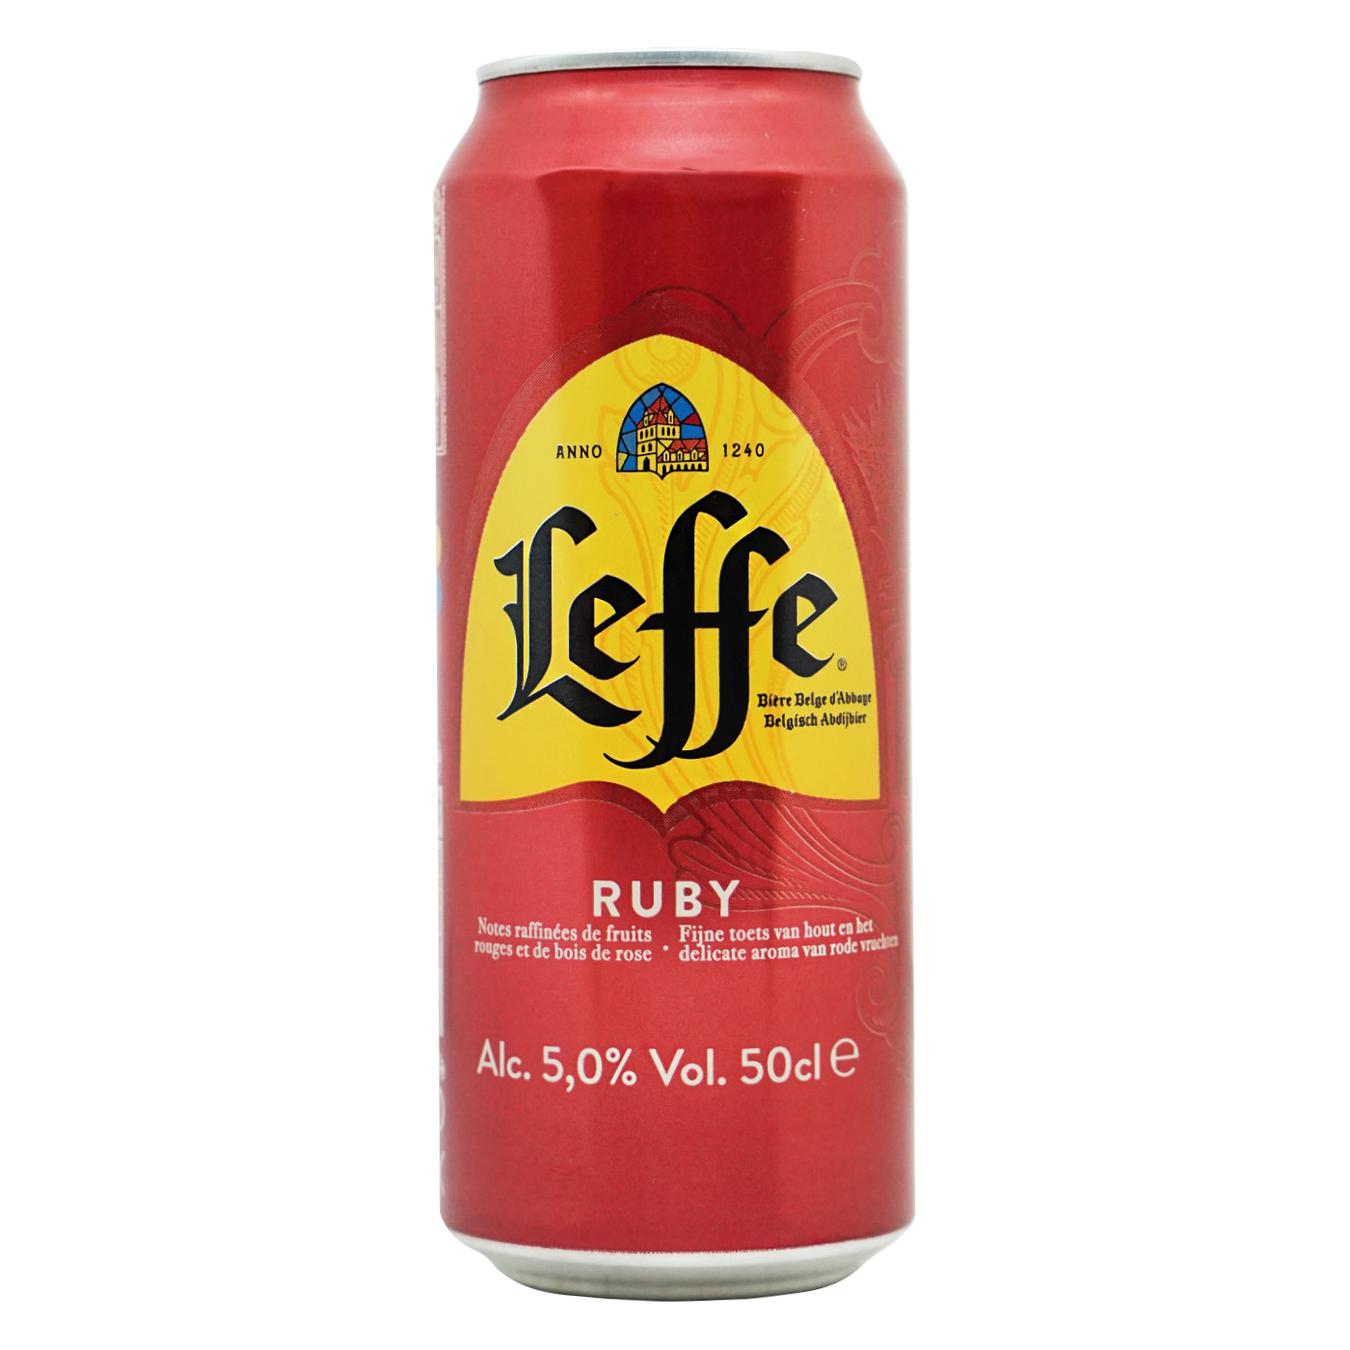 Light beer Leffe Ruby 5% 0.5 l iron can